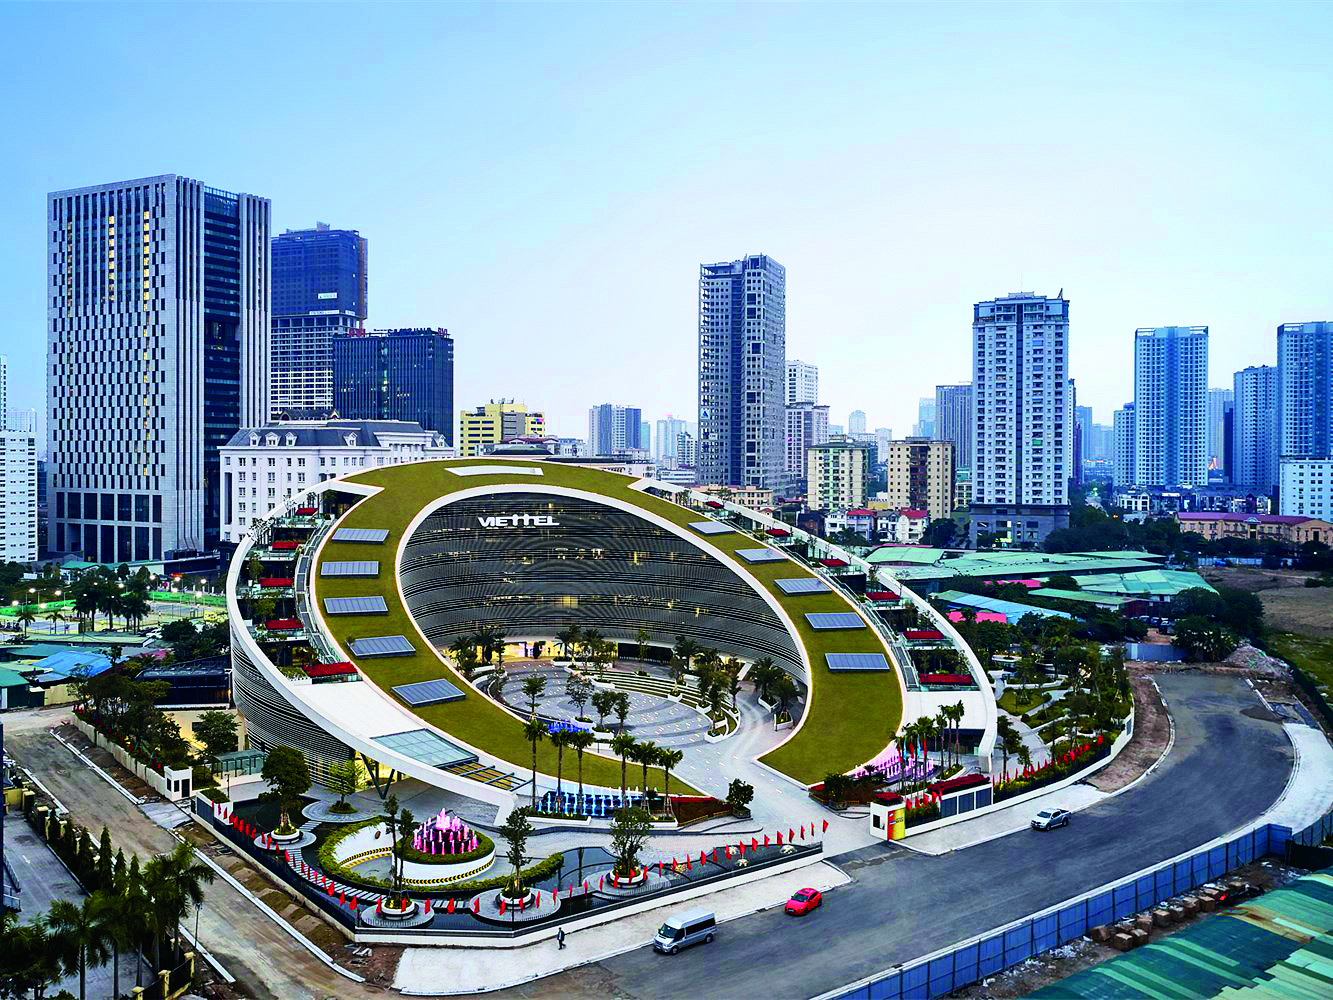 Viettel’s new Hanoi headquarters, designed by American architectural firm Gensler, curves and slopes from the foot to the top of the grass-covered roof in an oval shape inspired by the company logo.